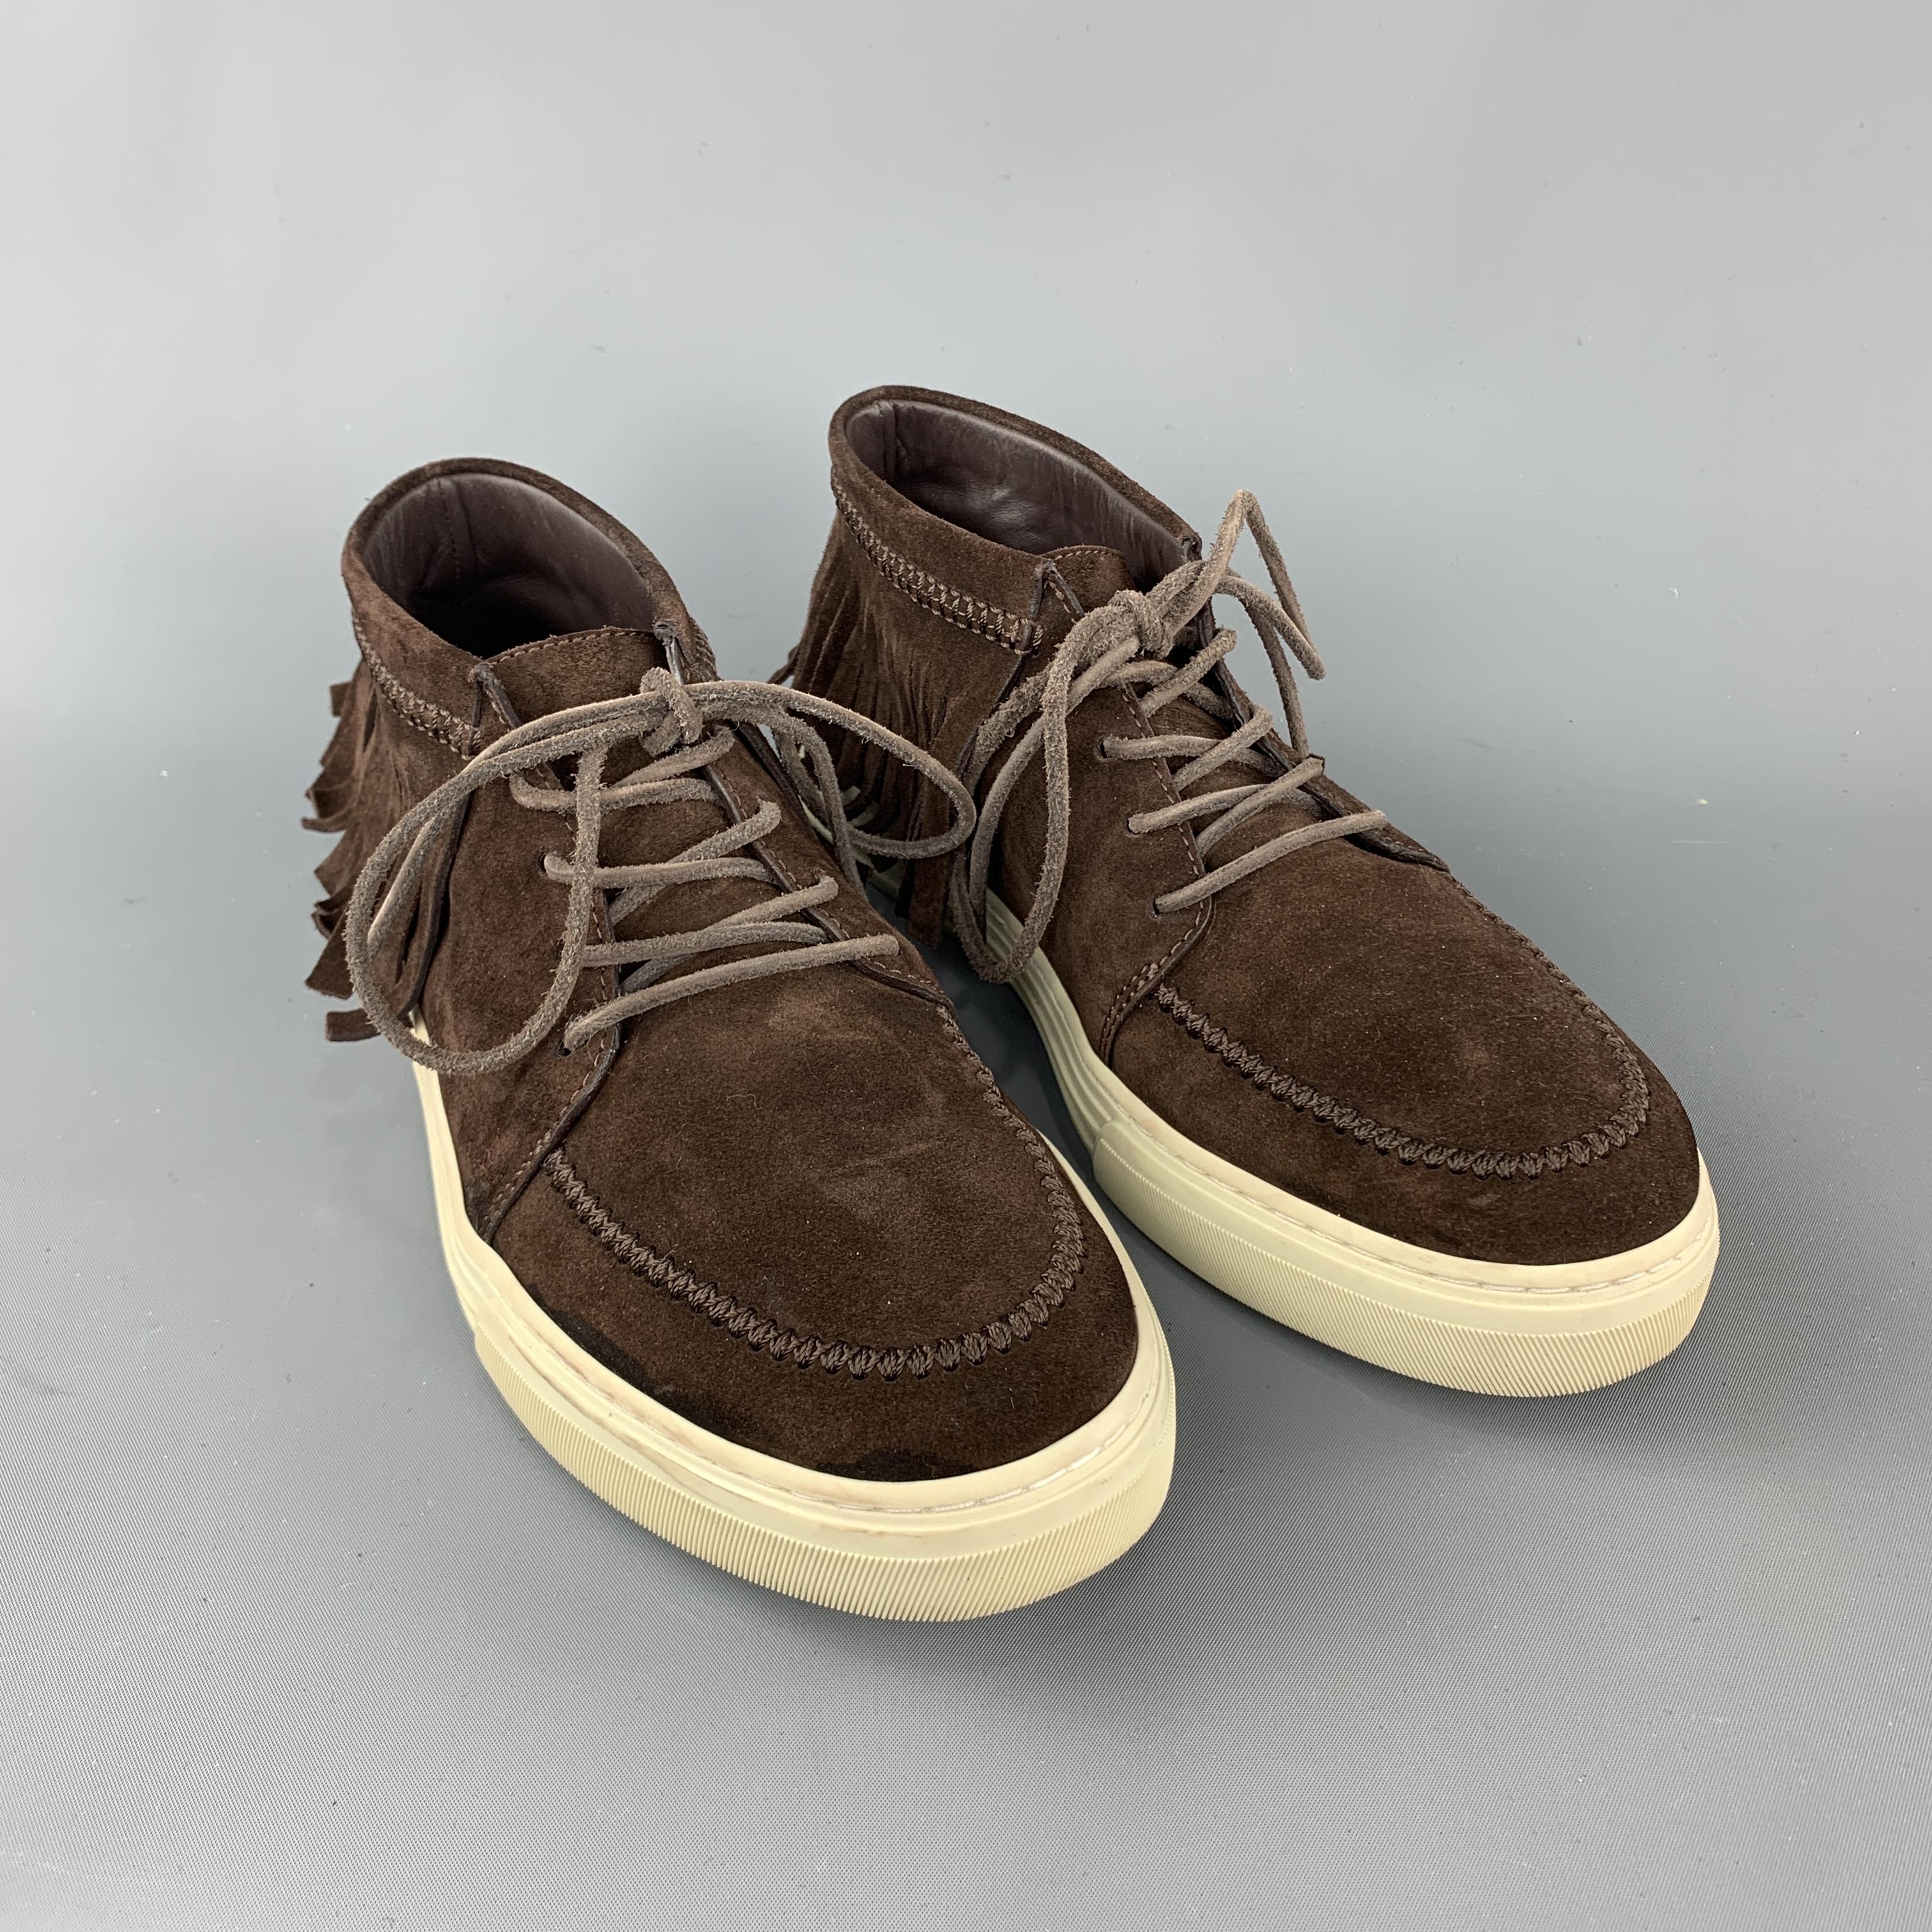 GUCCI sneaker comes in a brown suede featuring a lace up style, fringe detail, and a rubber sole. Made in Italy.
 
Very Good Pre-Owned Condition.
Marked: 7
 
Measurements:
 
Outsole: 11.5 in. x 4.5 in.